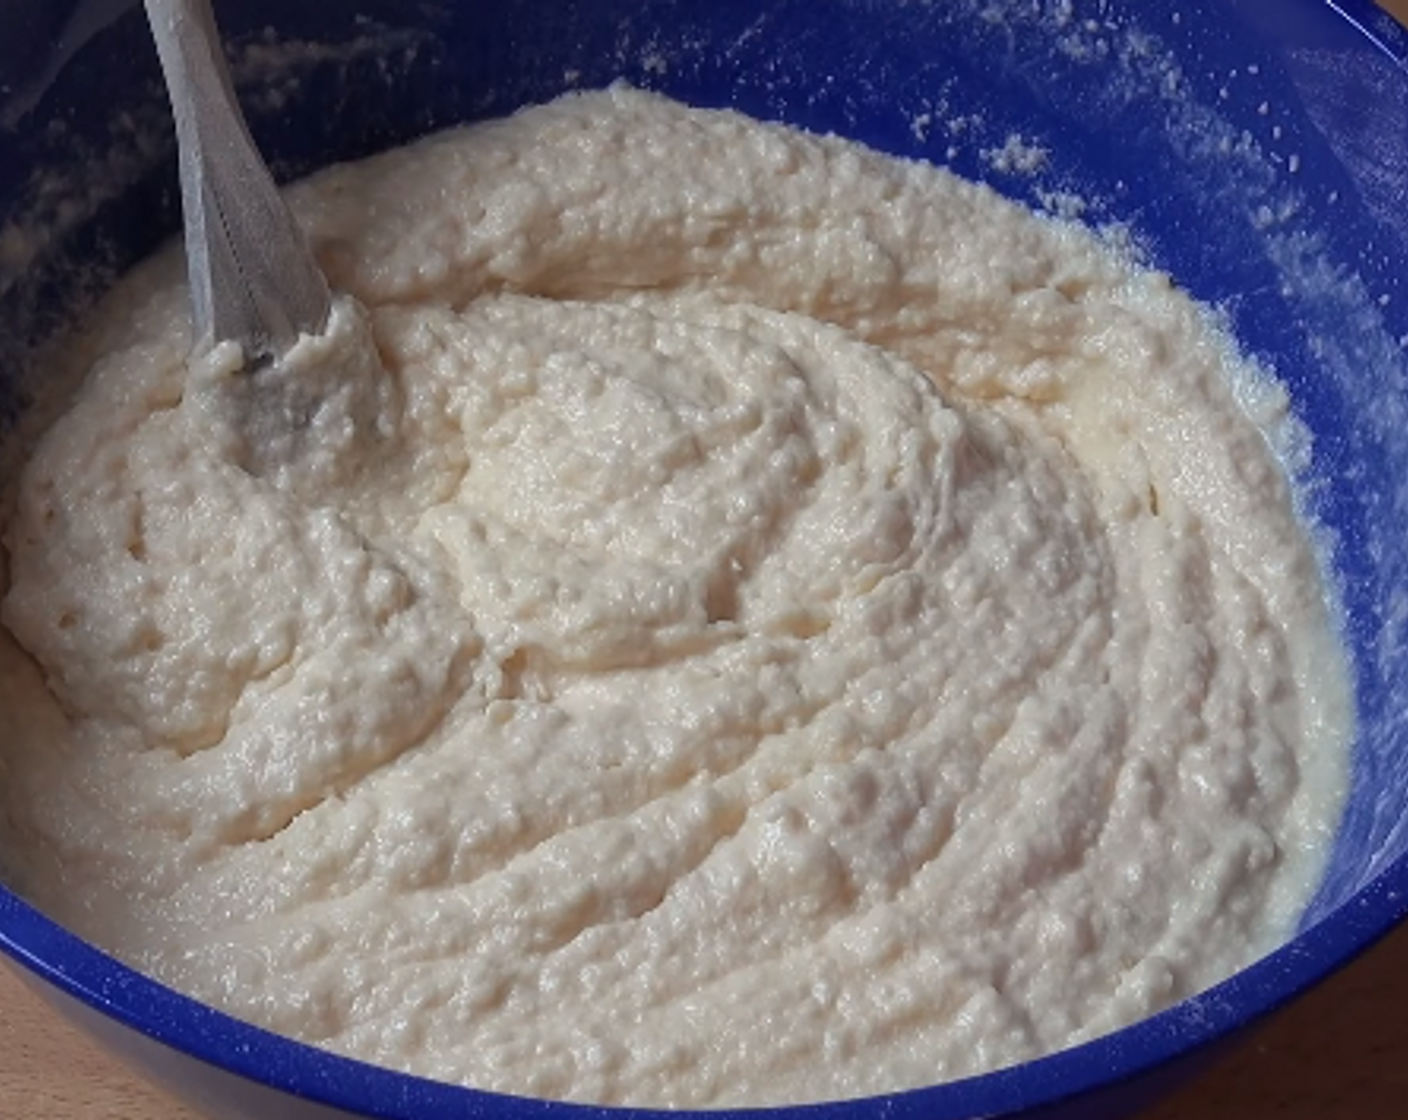 step 2 Add in the Eggs (2) one at a time, beating after each one. Sift in Self-Rising Flour (2 cups) and add Unsweetened Shredded Coconut (1 cup). Stir. Add Vanilla Extract (1 tsp) and Milk (1 cup). Stir again. Gently fold in Sprinkles (1/4 cup).